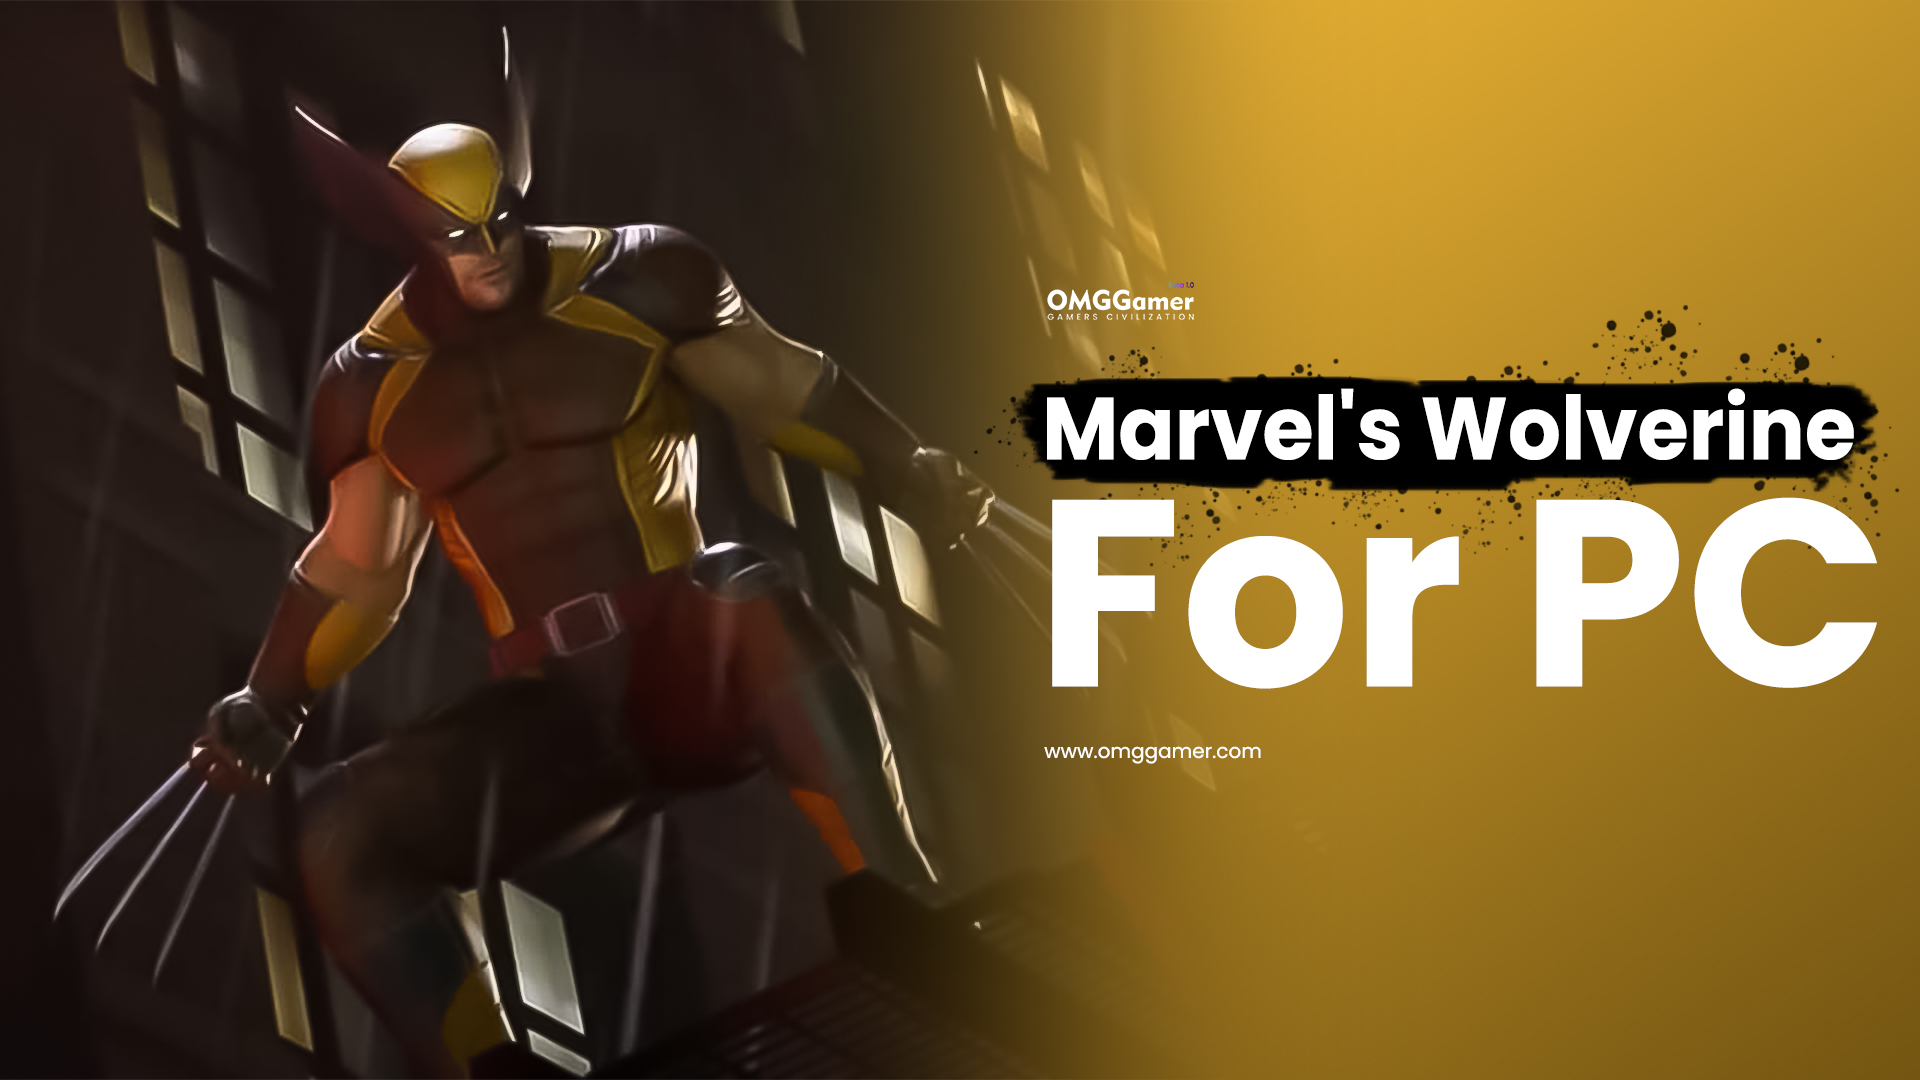 Marvel's Wolverine Release Date for PC